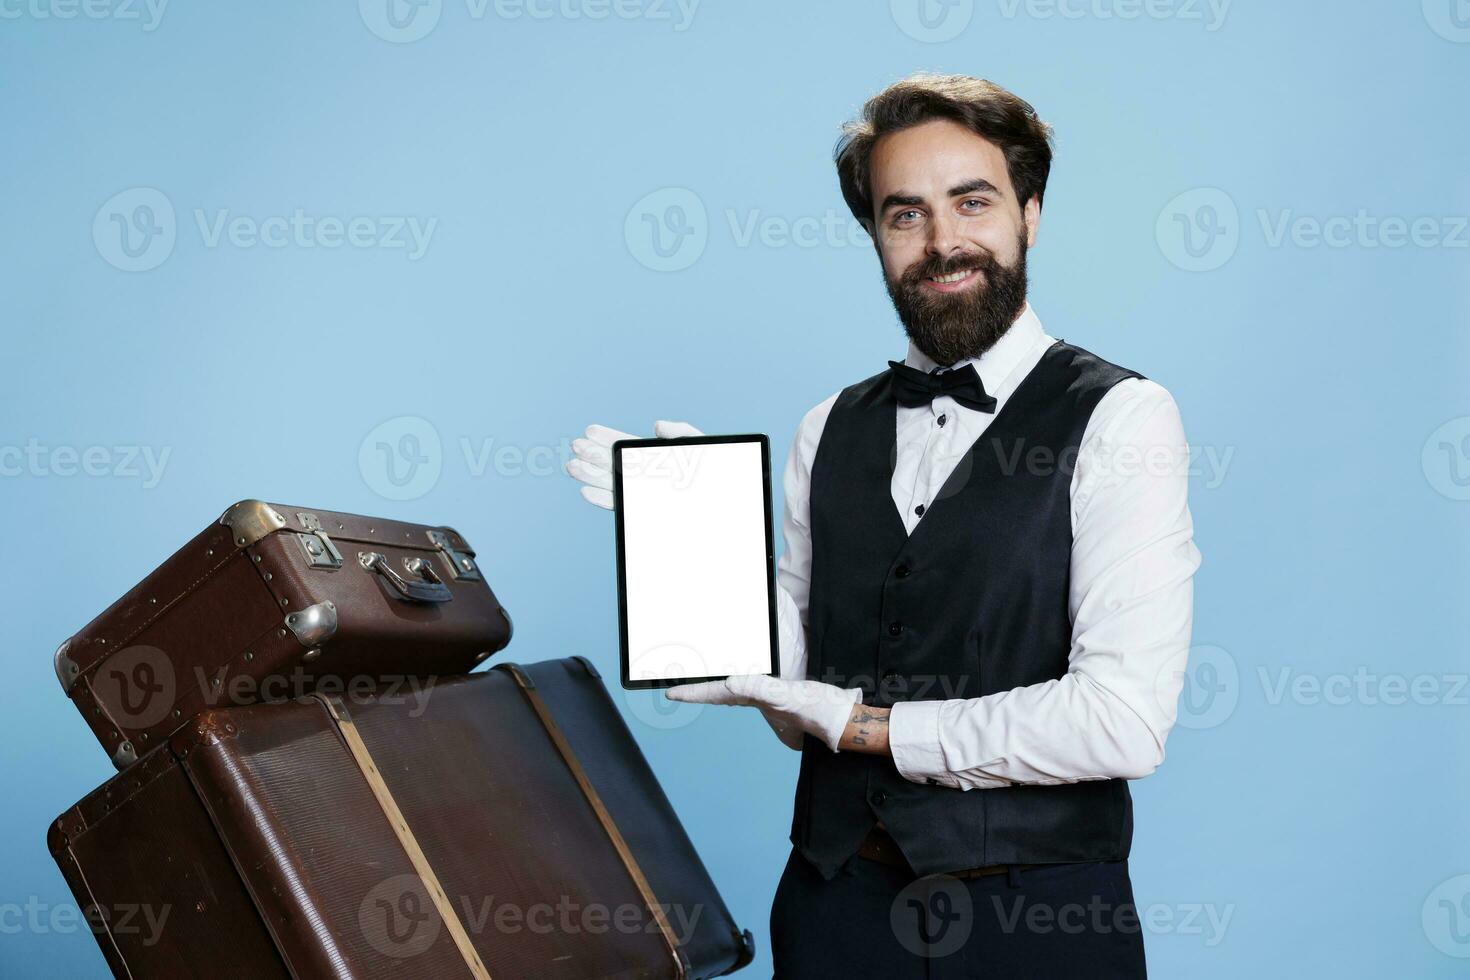 Bellboy presents white blank screen on tablet against blue background, wearing formal suit and gloves next to pile of suitcases. Classy porter showing copyspace template on device. photo